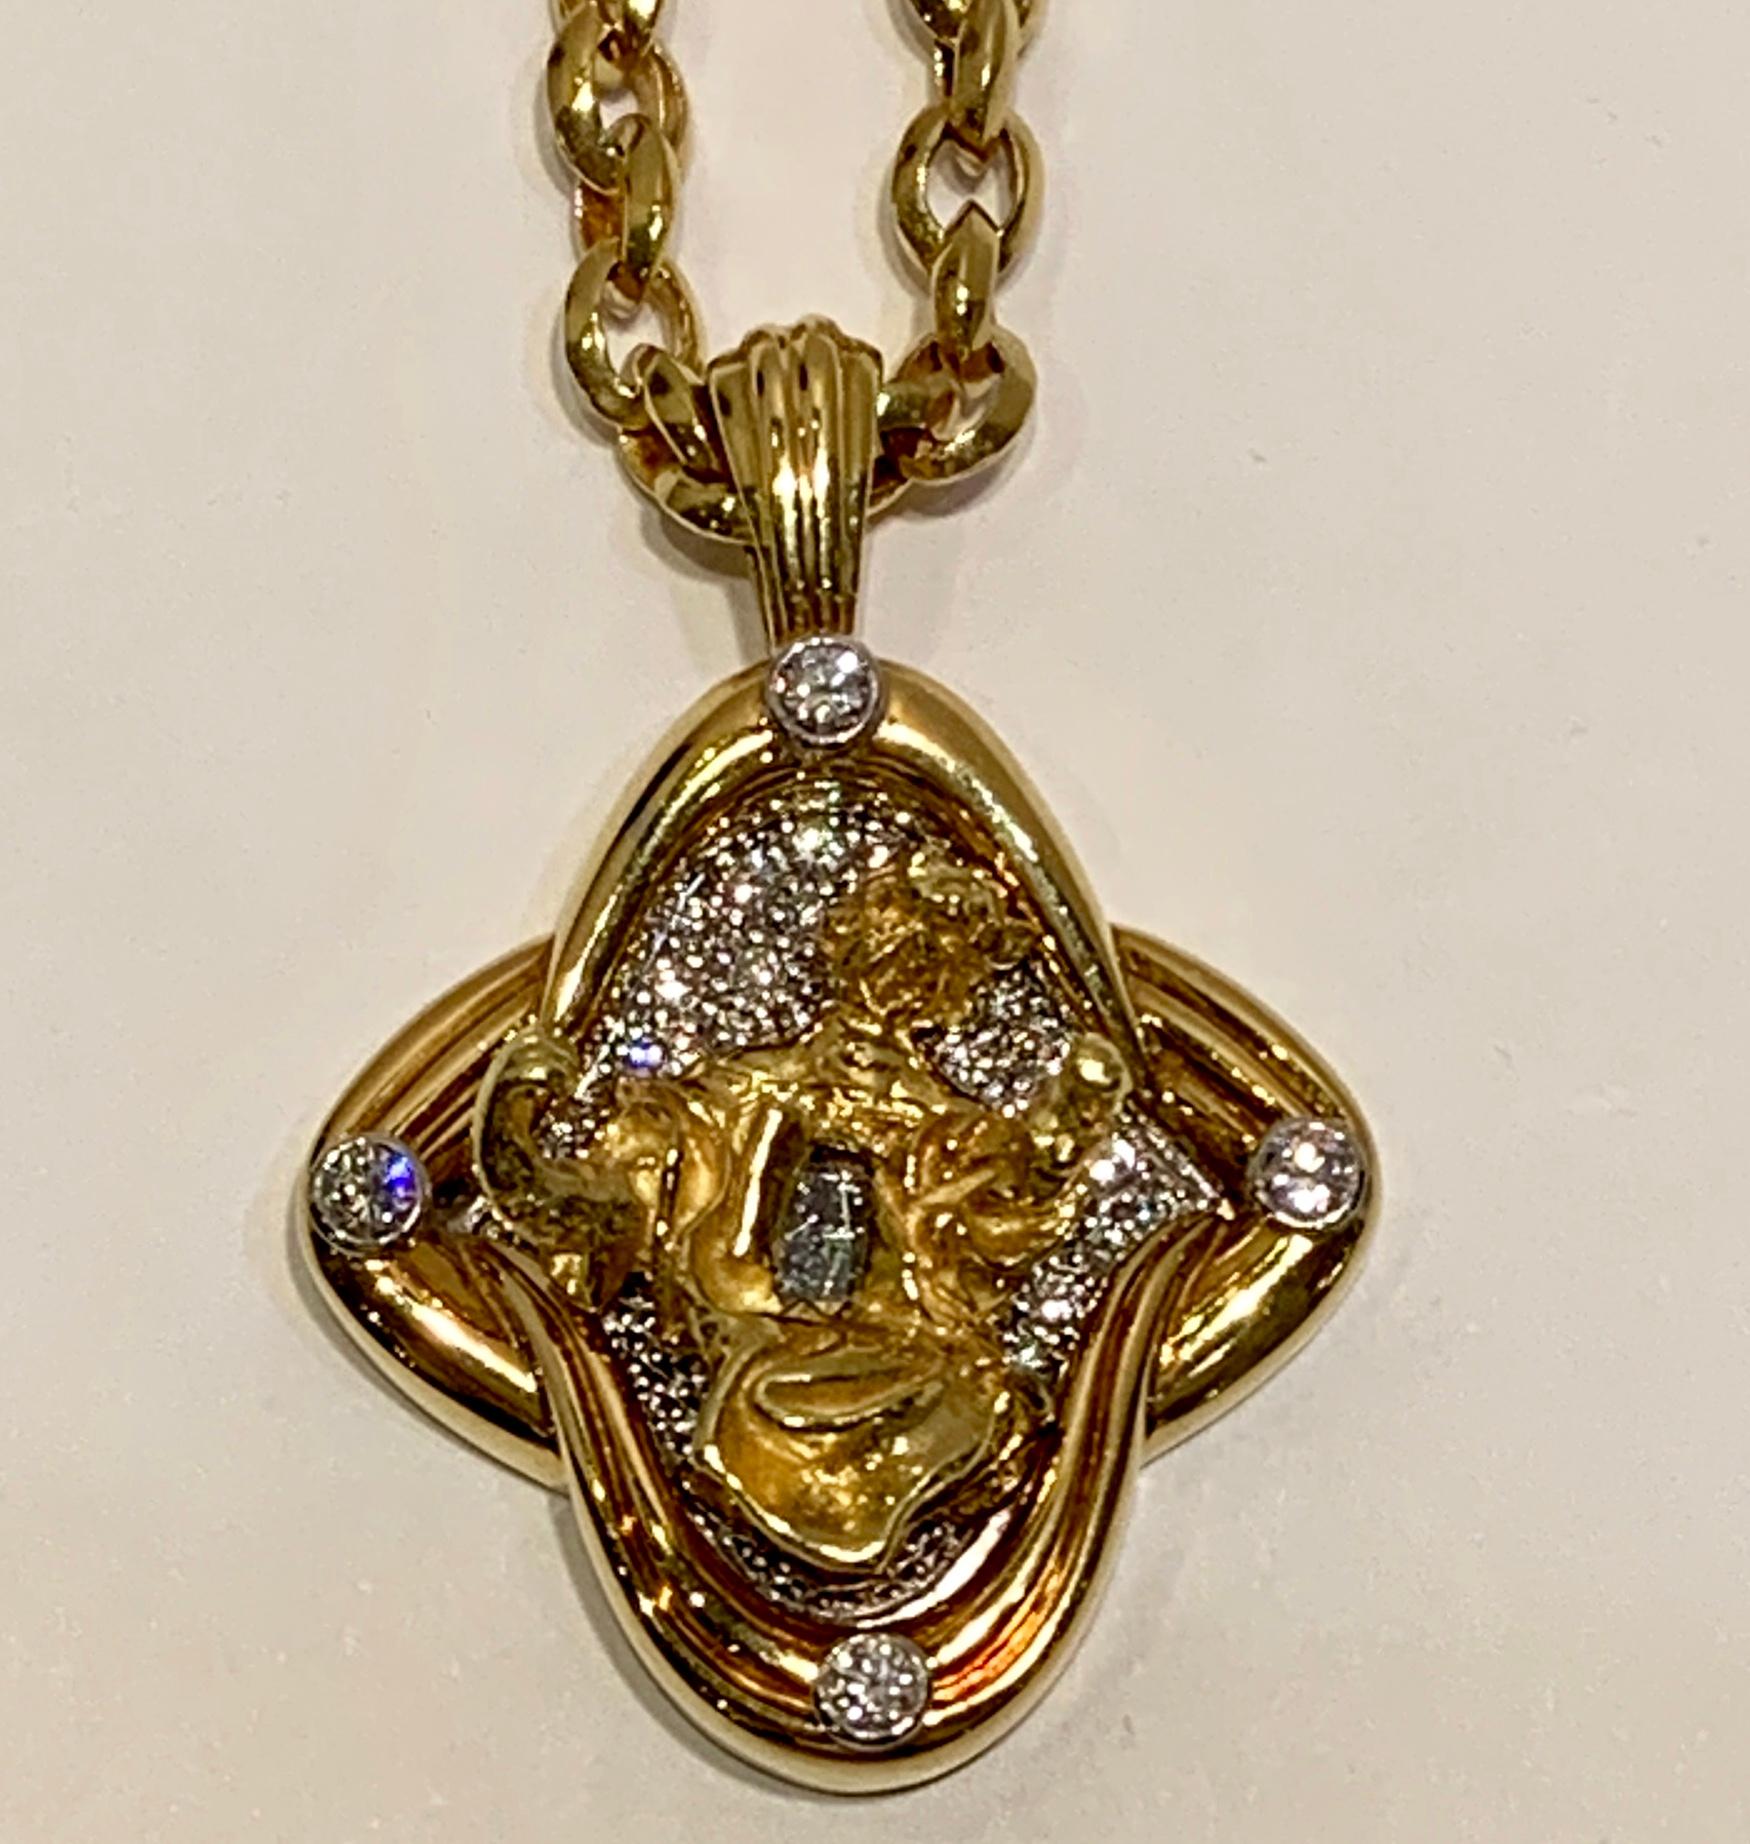 gold madonna necklace